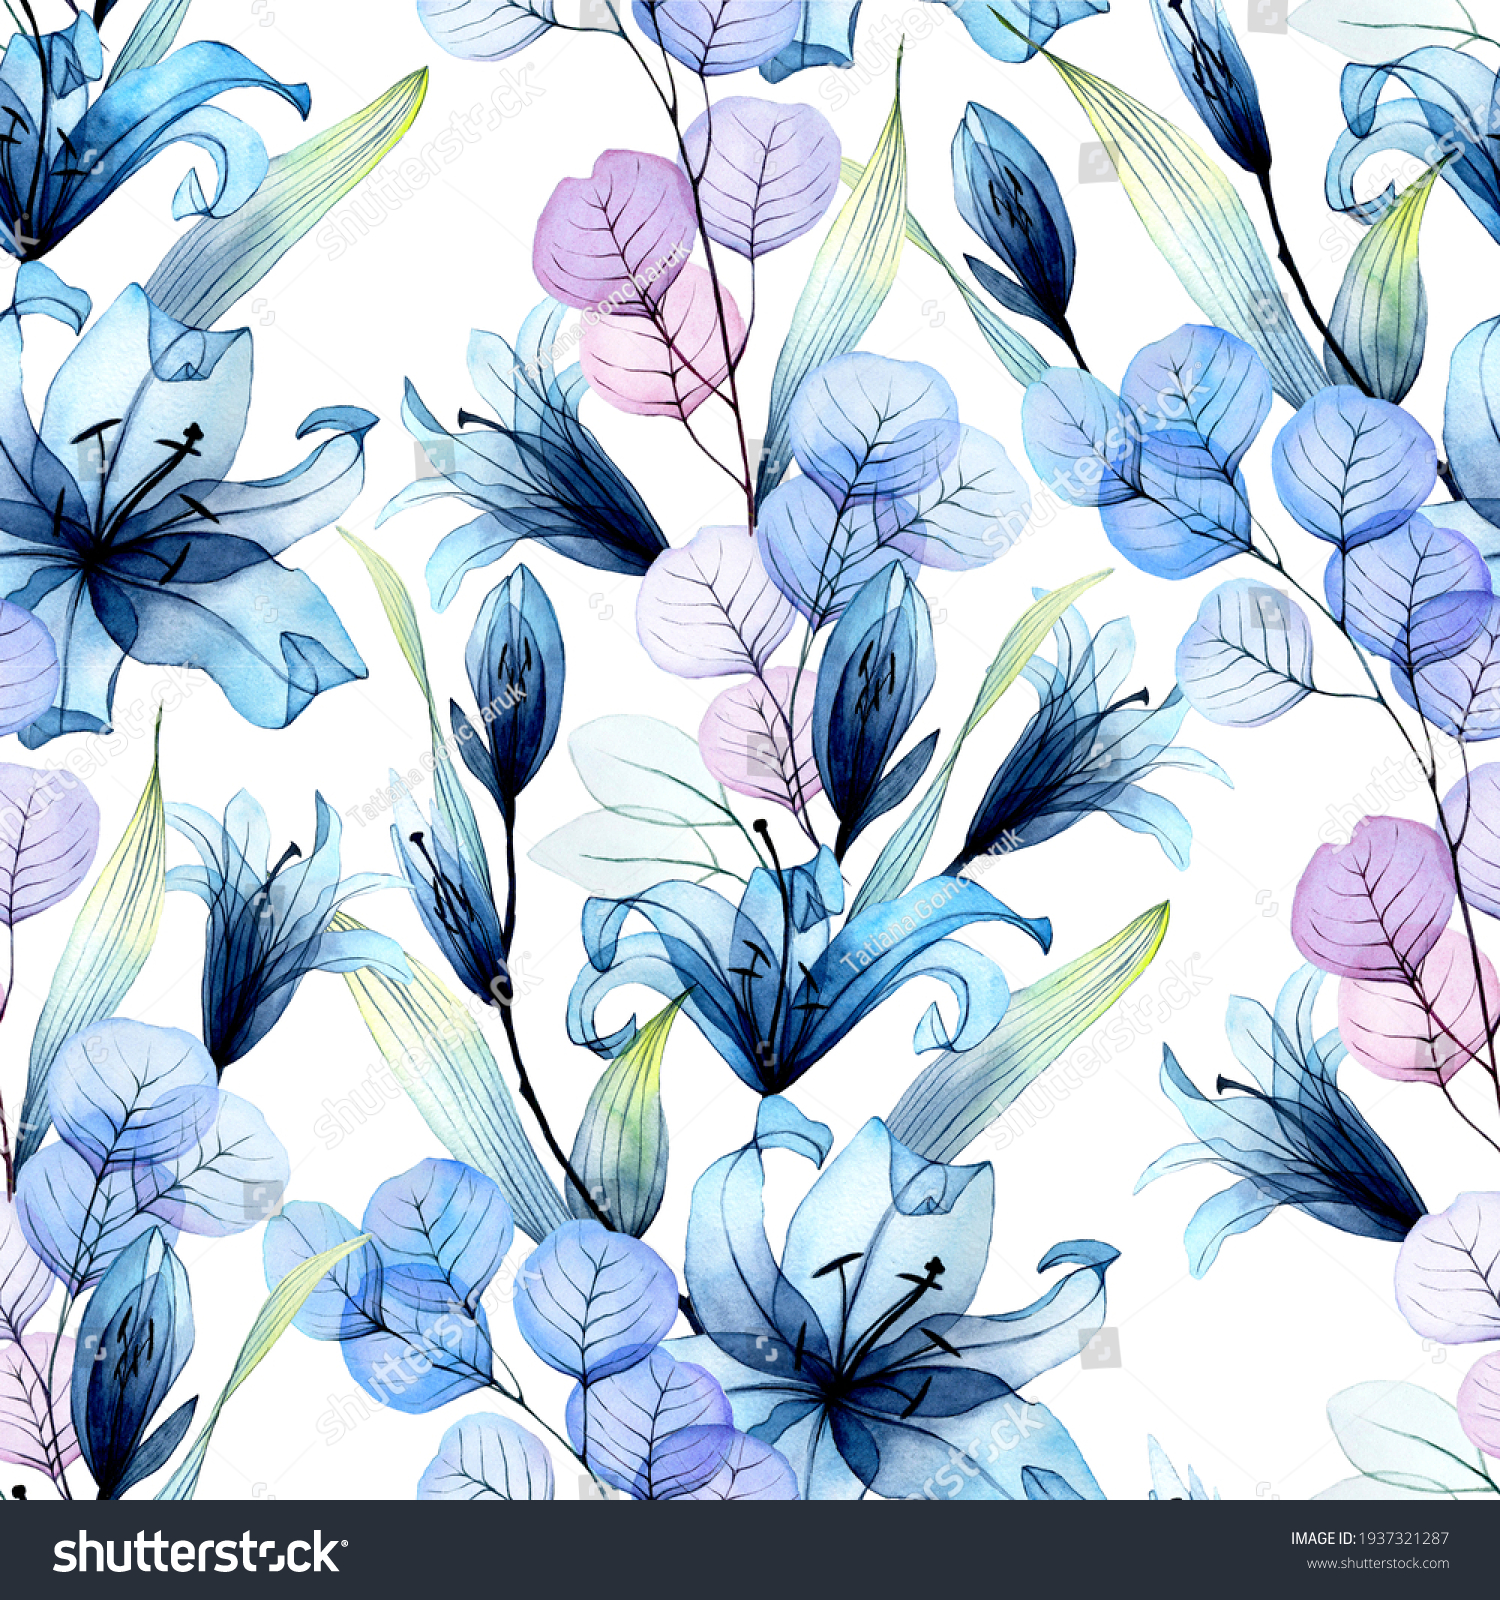 watercolor seamless pattern with transparent flowers. blue lily flowers pink eucalyptus leaves on a white background.